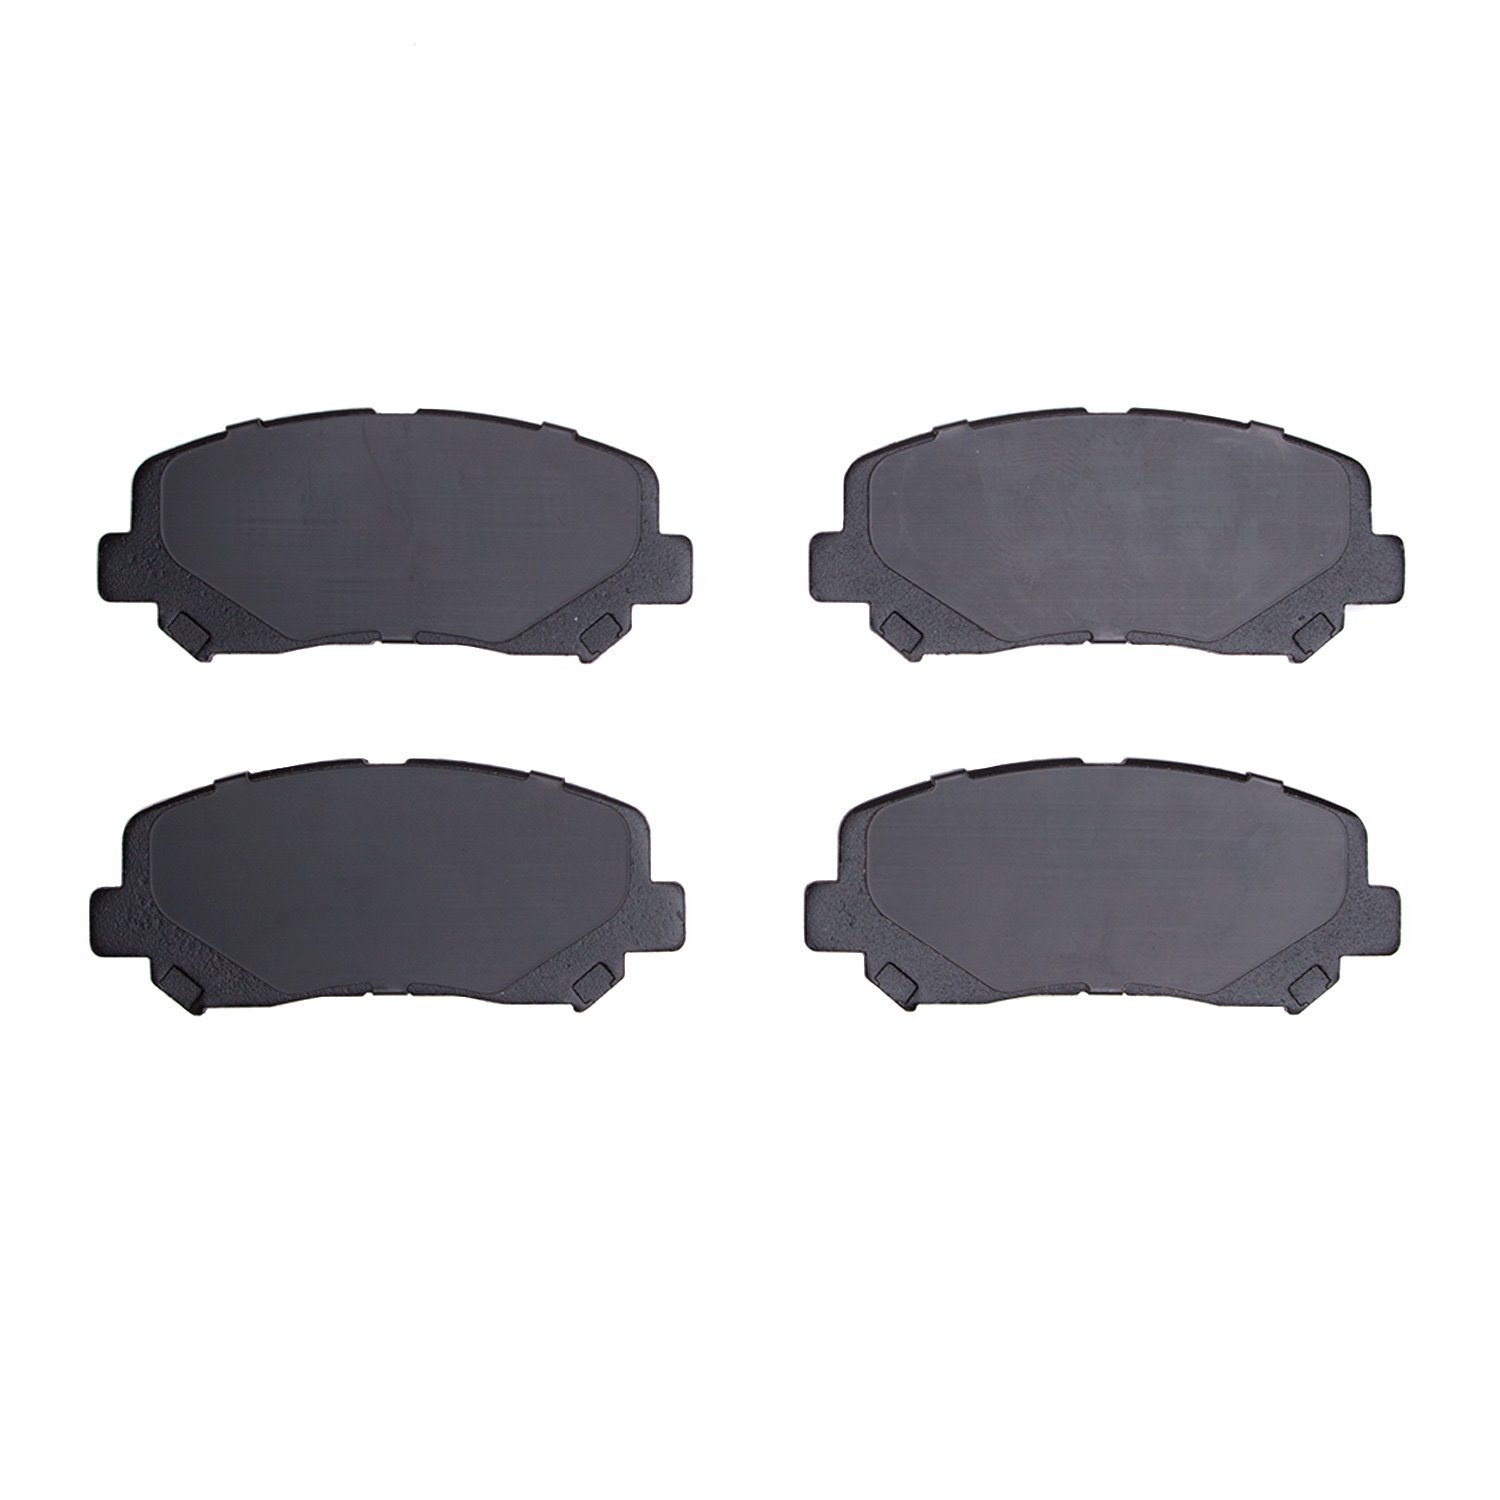 1551-1623-00 5000 Advanced Ceramic Brake Pads, Fits Select Ford/Lincoln/Mercury/Mazda, Position: Front